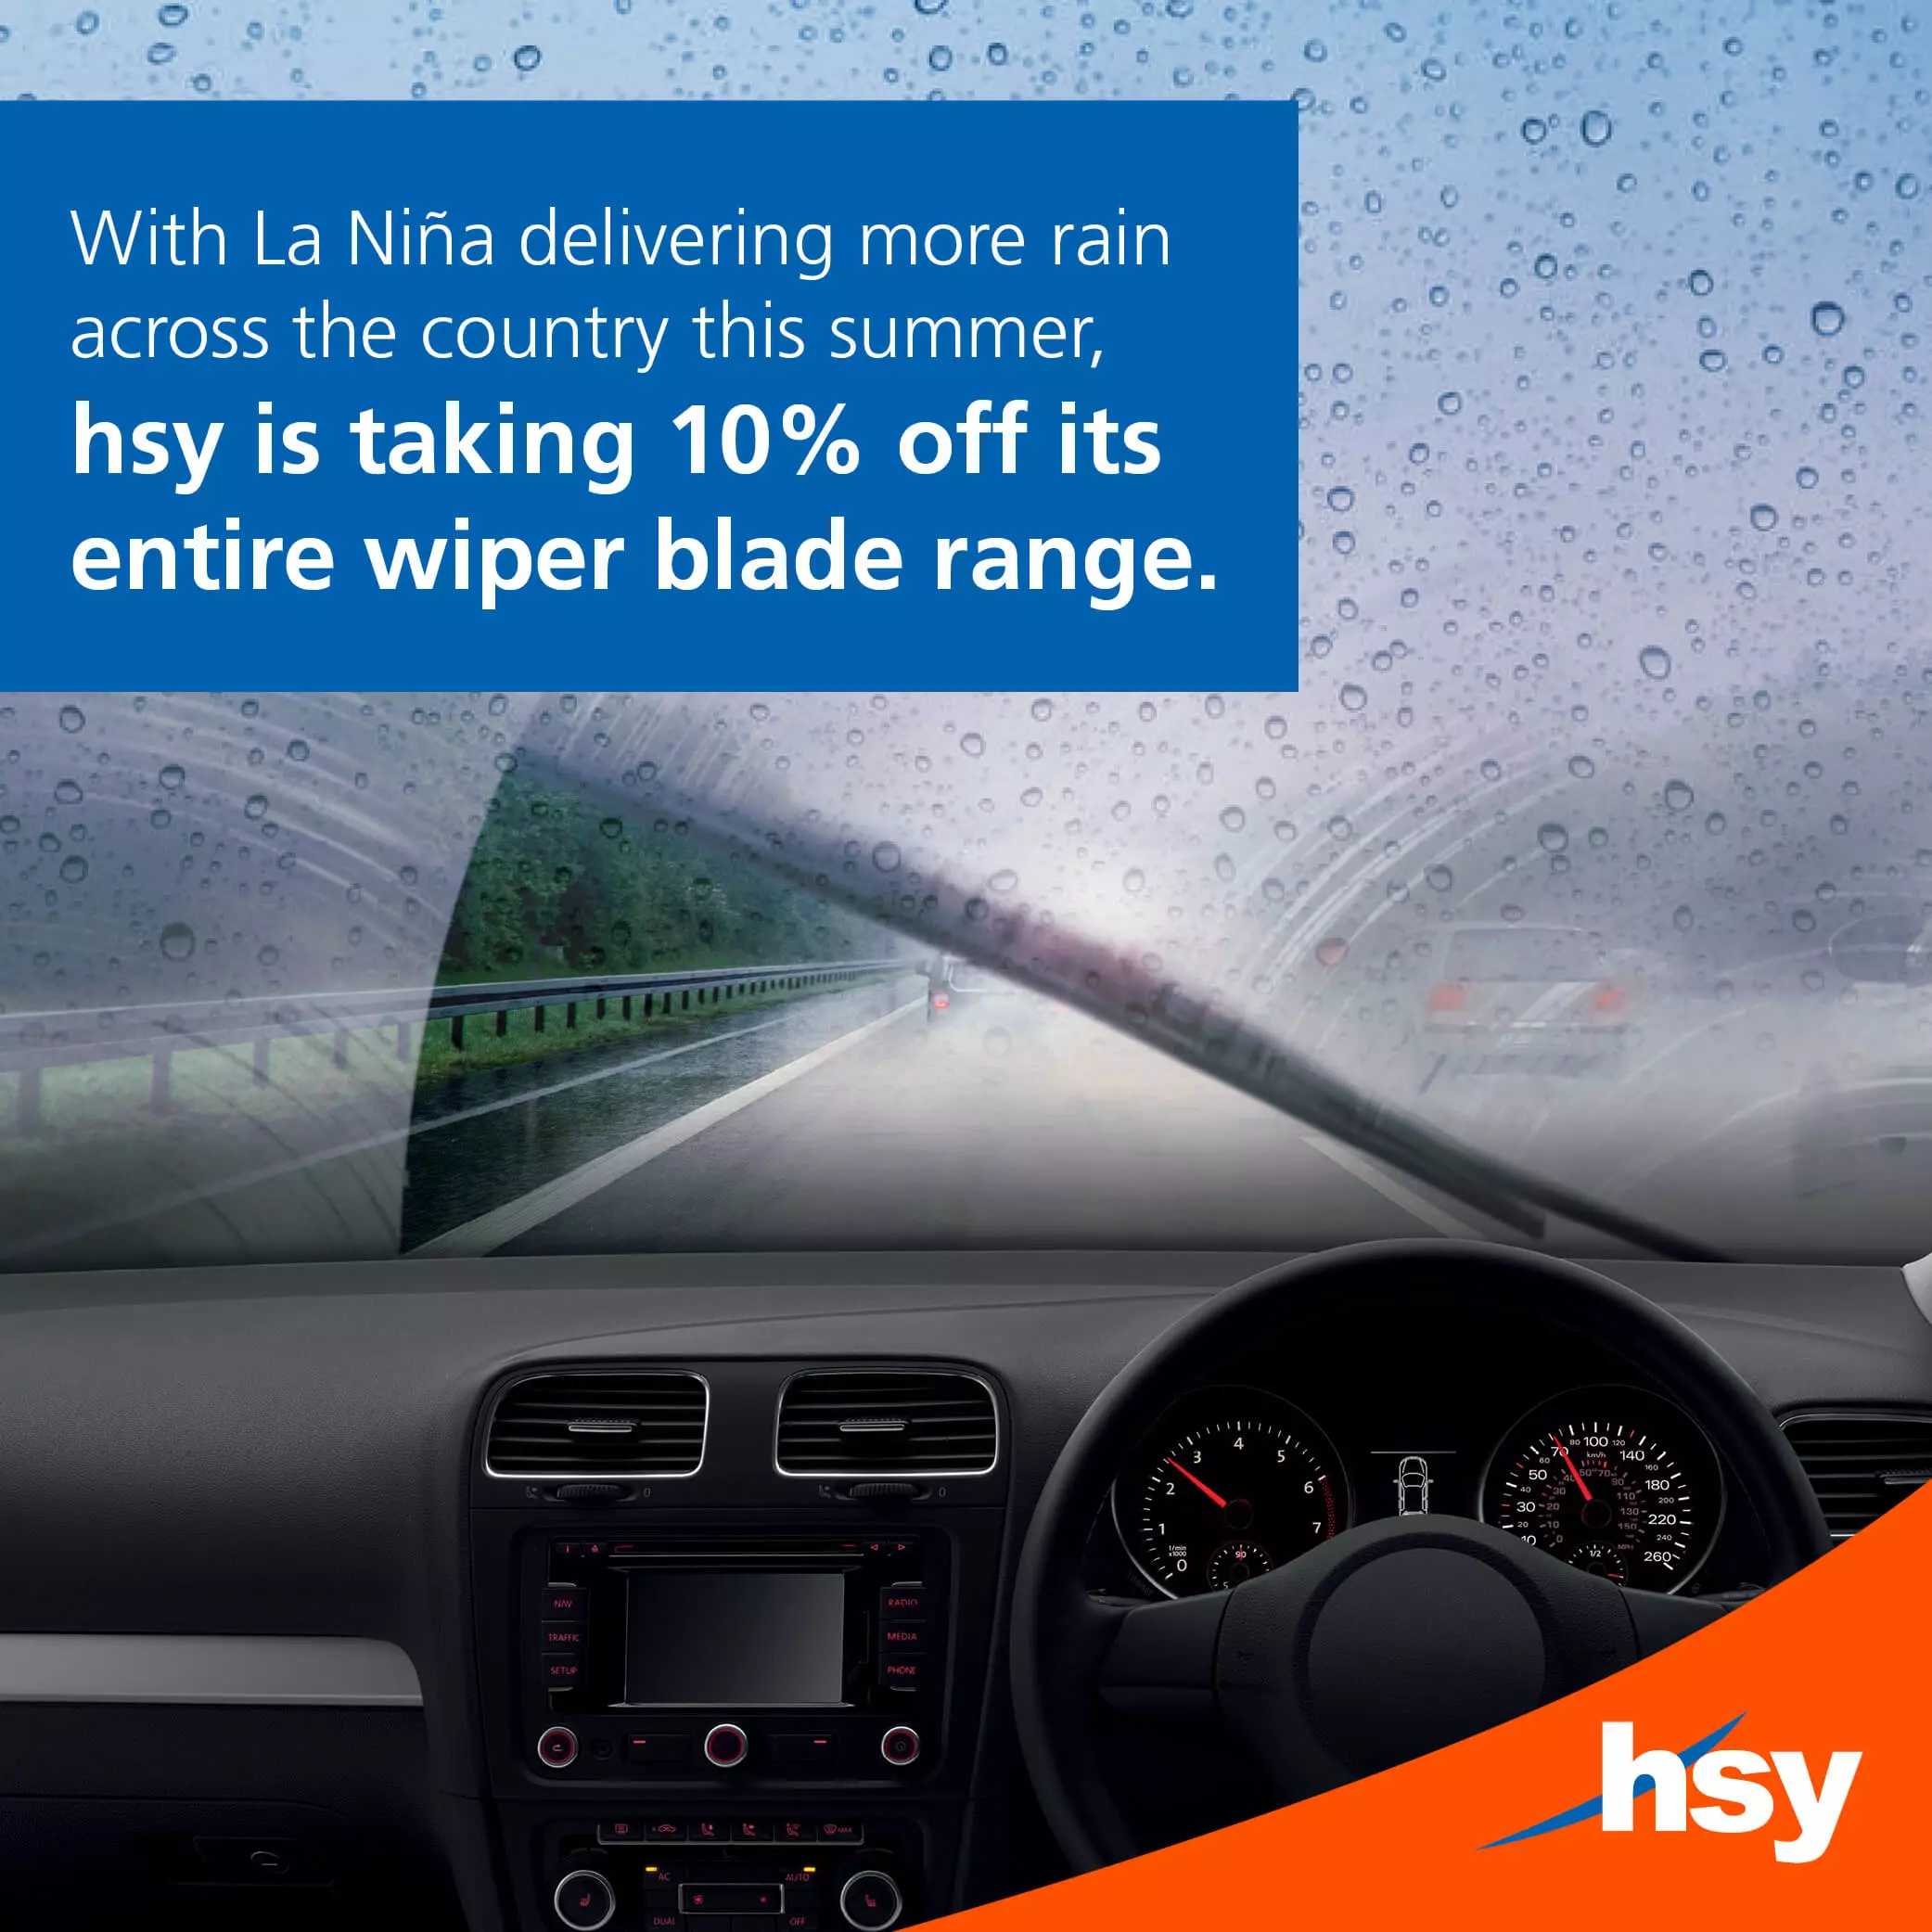 With rain forecast, hsy is taking 10% off its entire wiper blade range